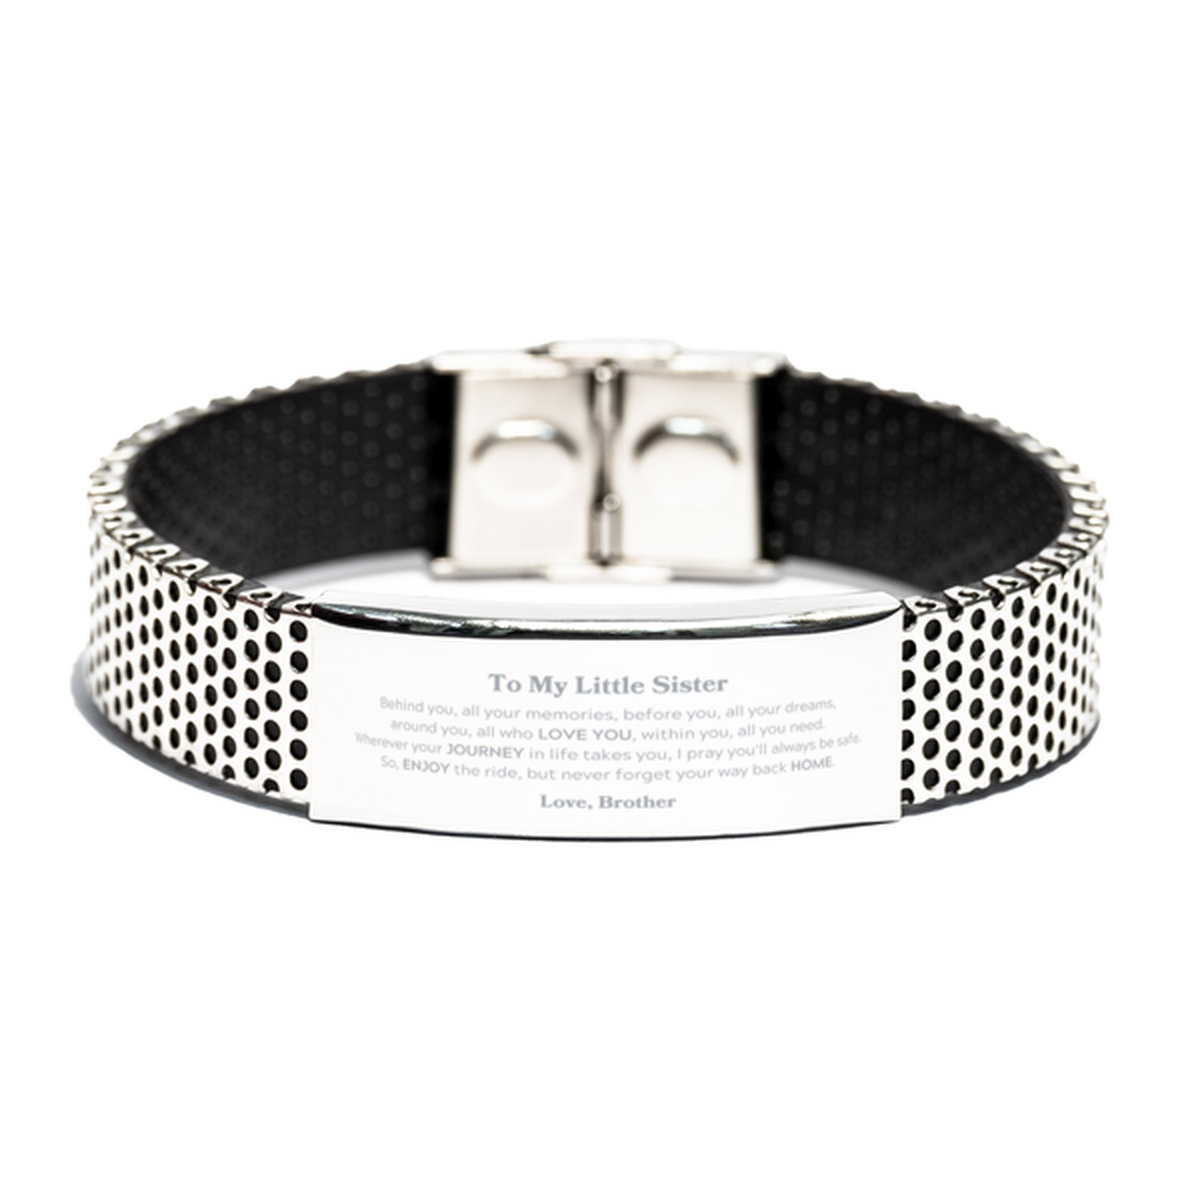 To My Little Sister Graduation Gifts from Brother, Little Sister Stainless Steel Bracelet Christmas Birthday Gifts for Little Sister Behind you, all your memories, before you, all your dreams. Love, Brother